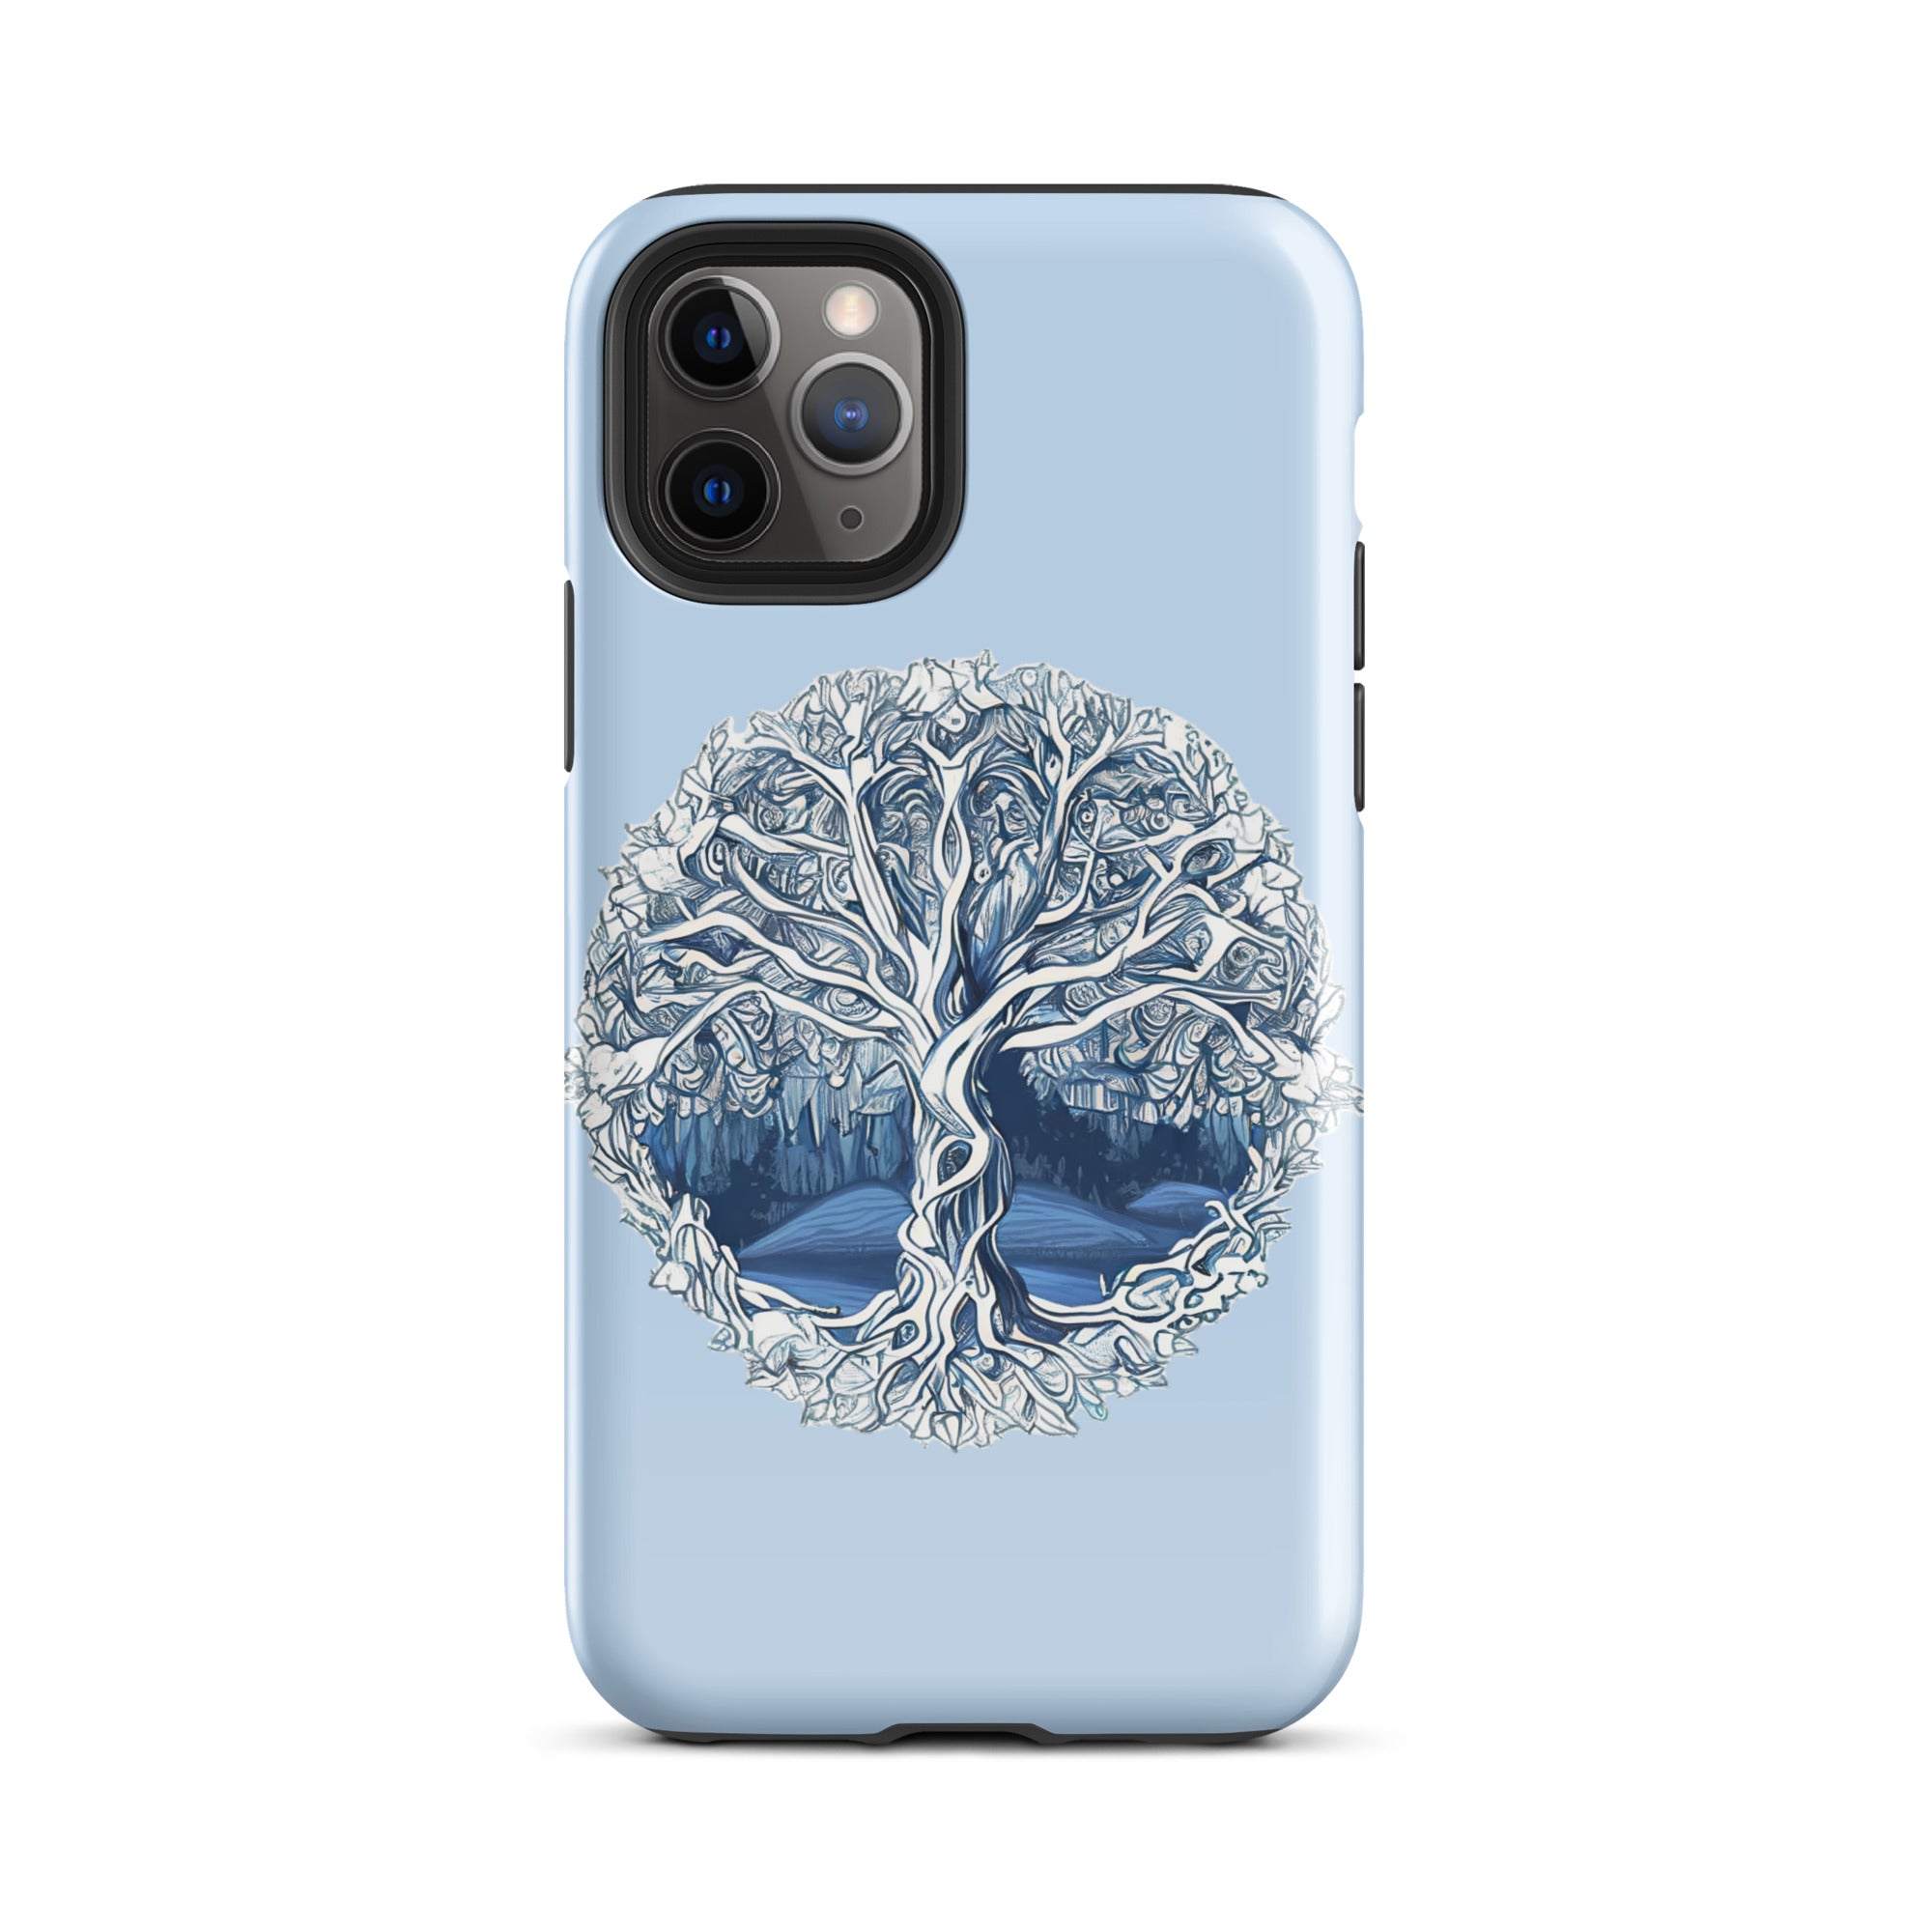 tough-case-for-iphone-glossy-iphone-11-pro-front-656e0a371278a.jpg